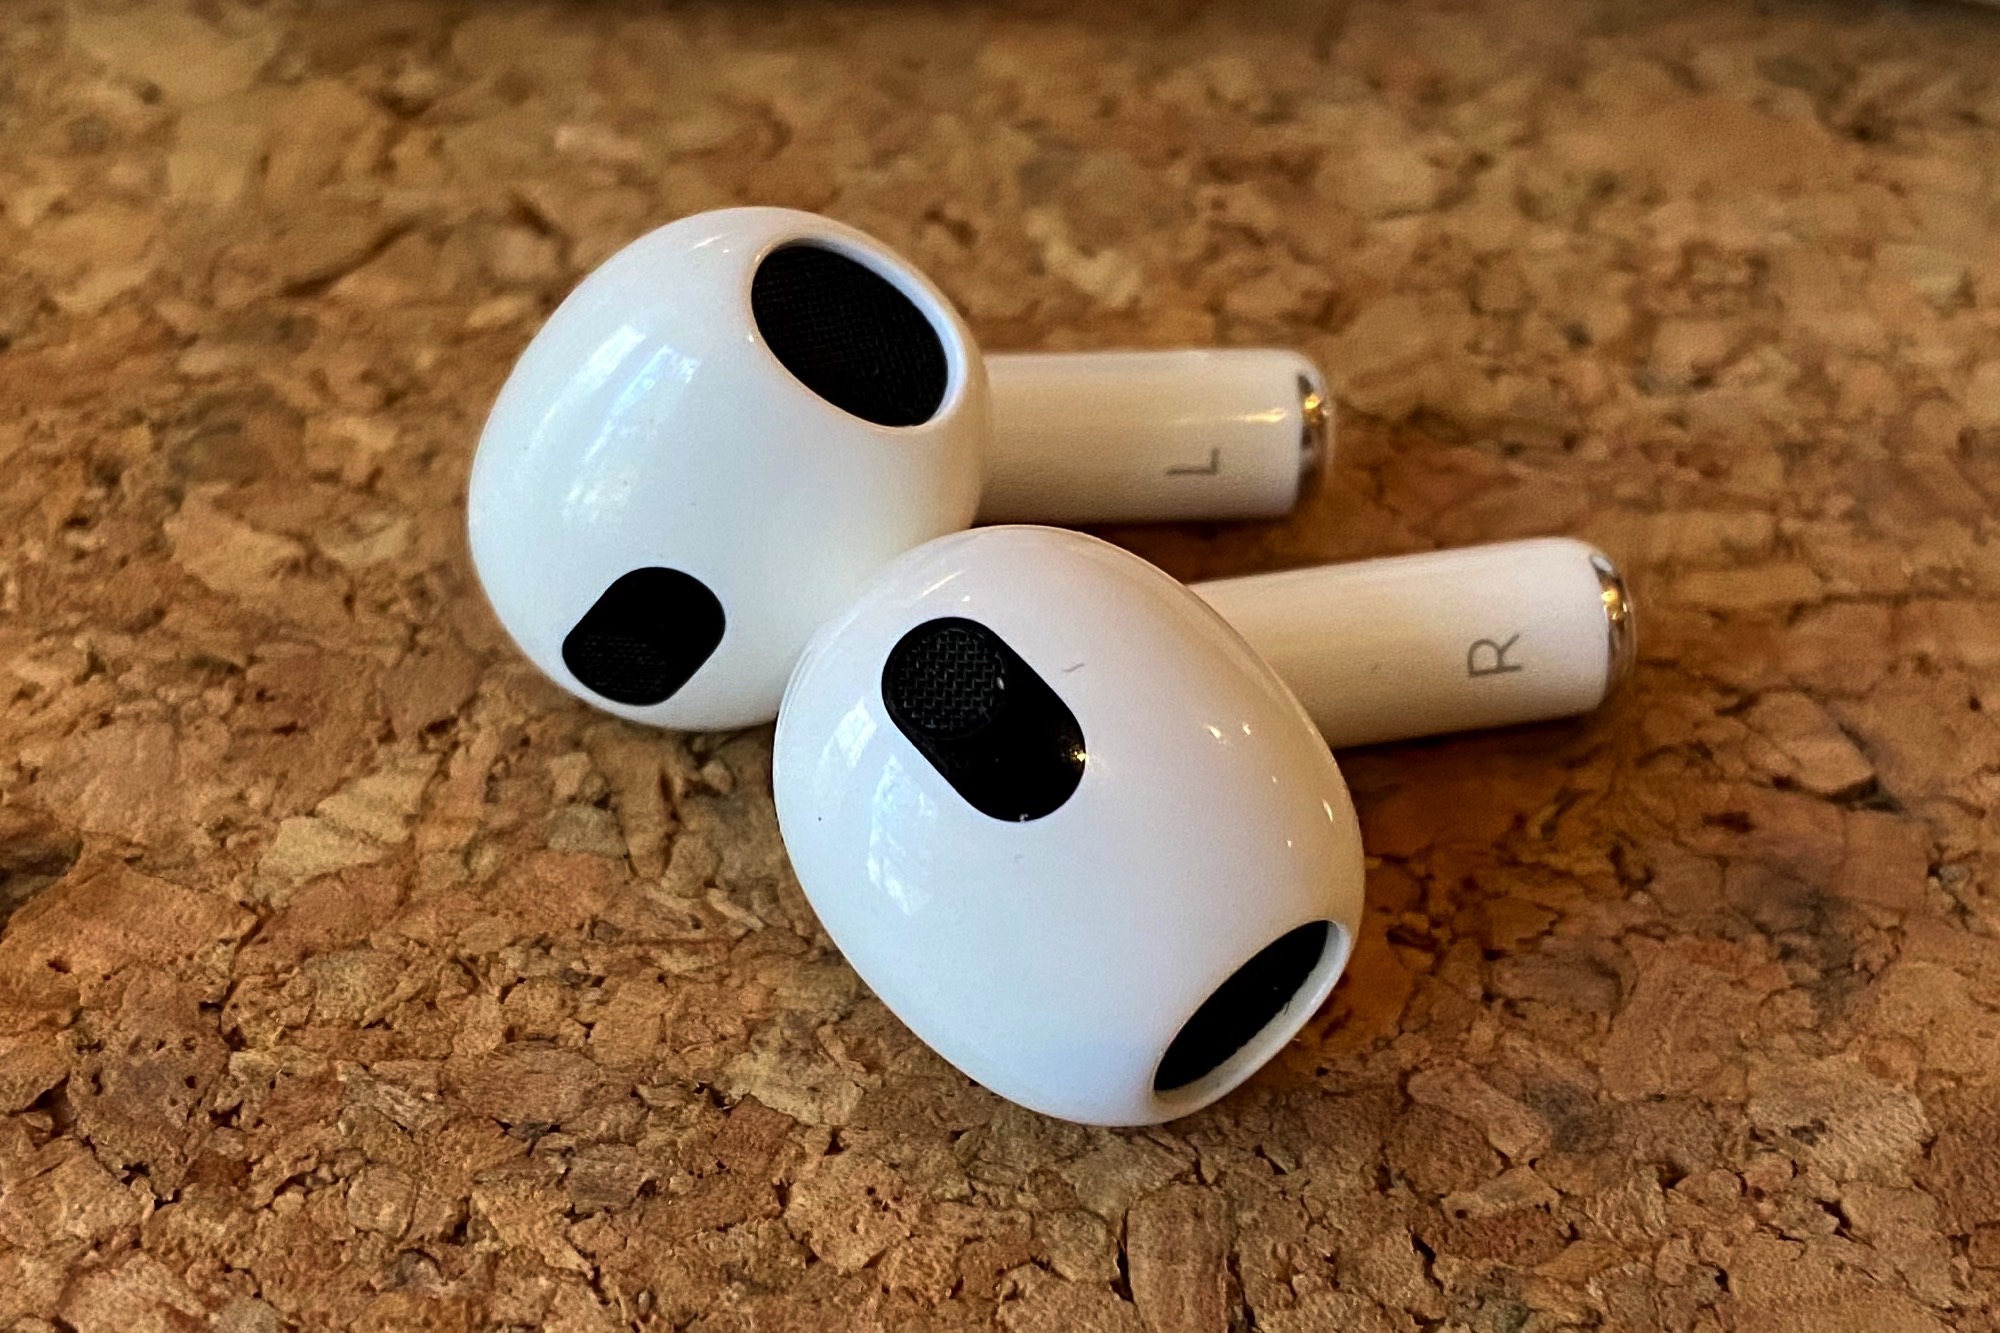 Heritage - Apple Airpods 3 Case Cover